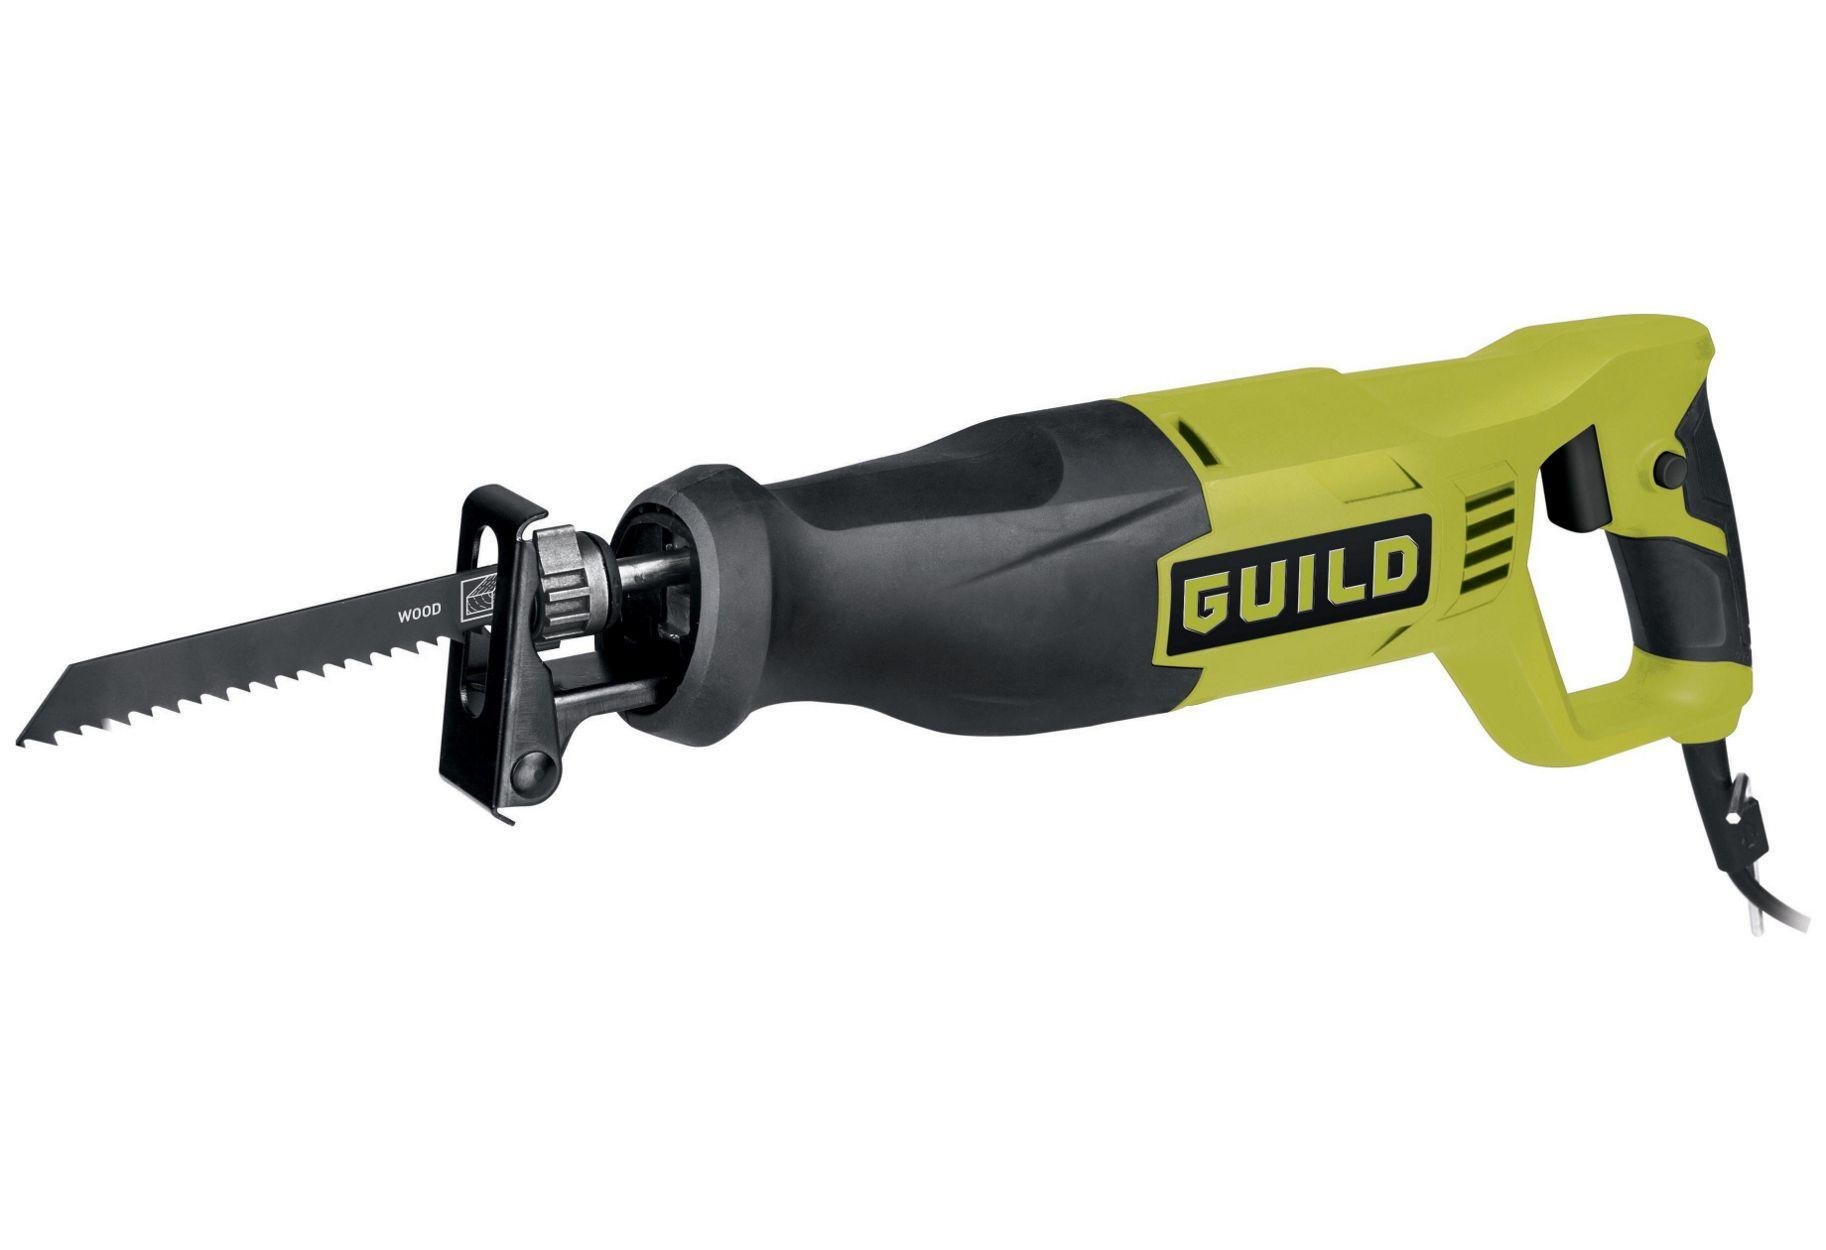 Guild Reciprocating Saw - 800W